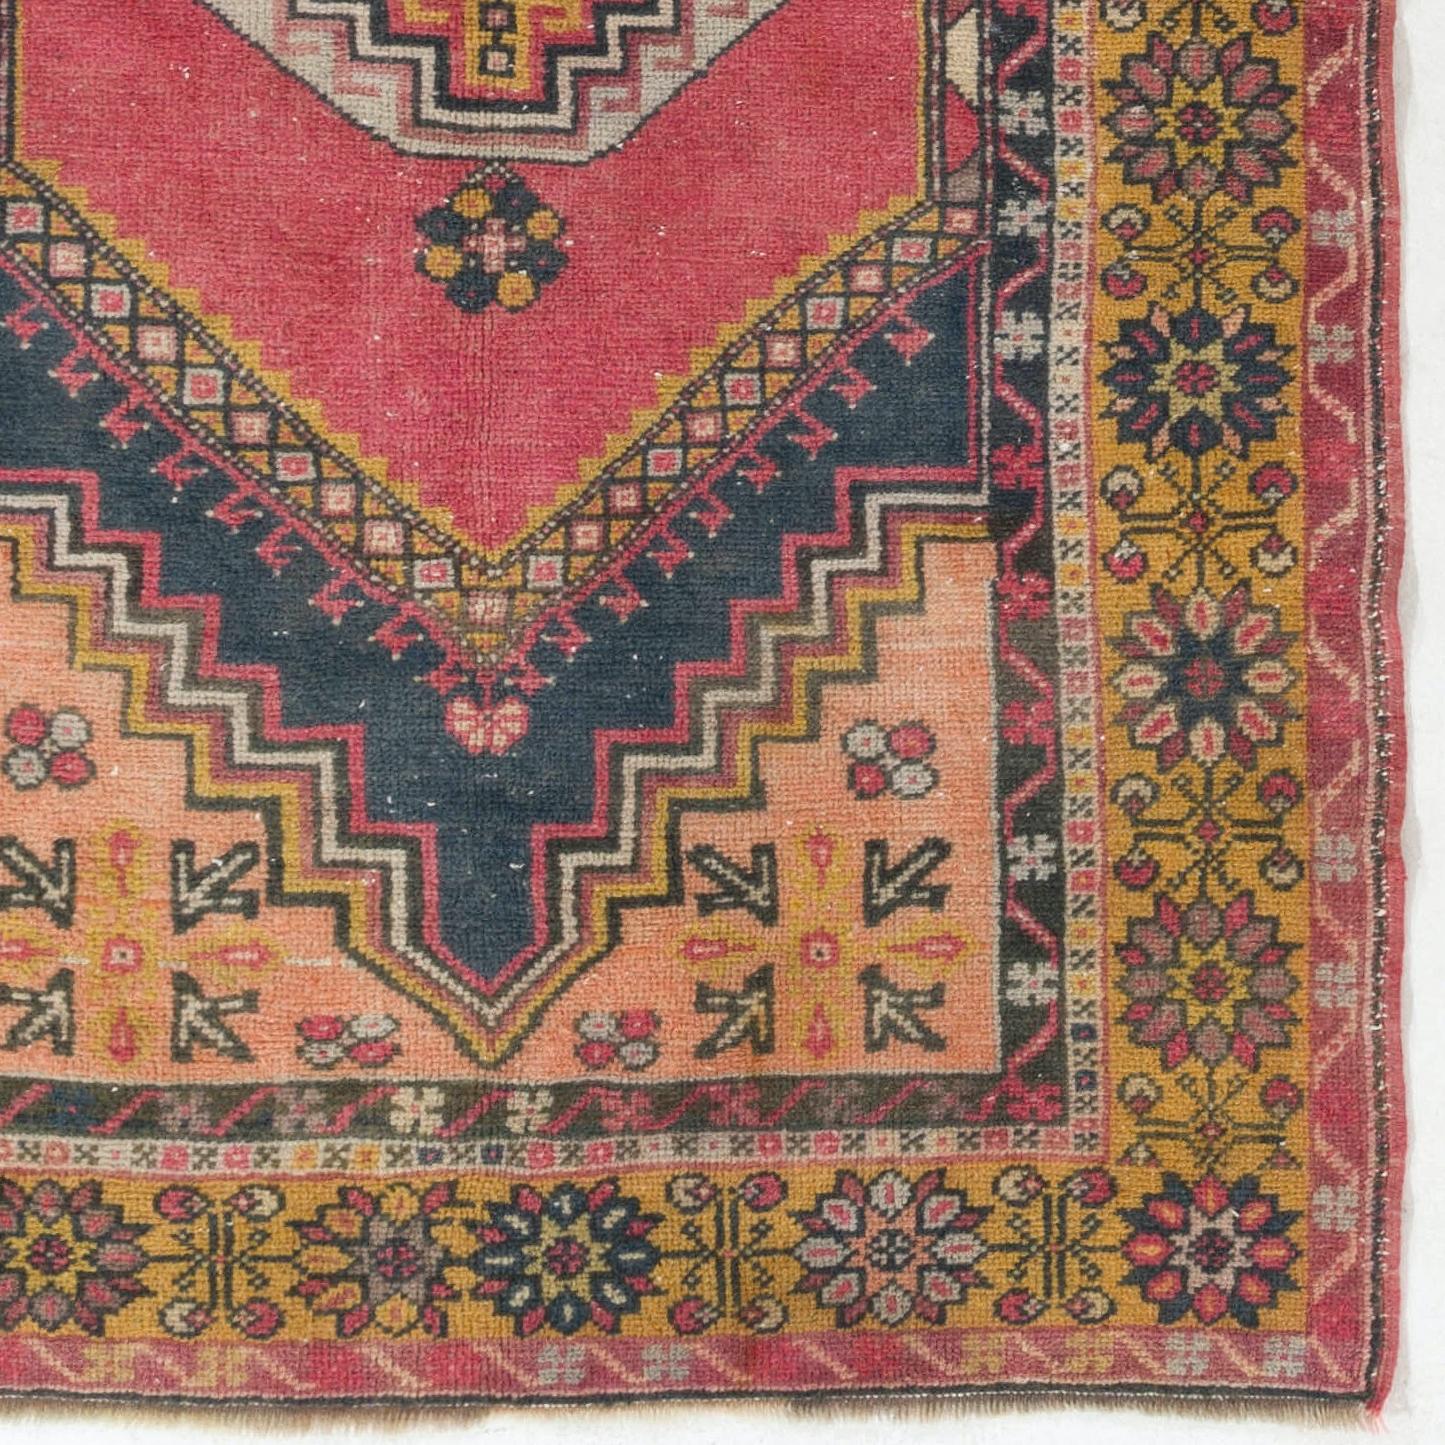 Turkish 4x7 Ft Traditional One of a Kind Vintage C.Anatolian Village Rug, Soft Wool Pile For Sale